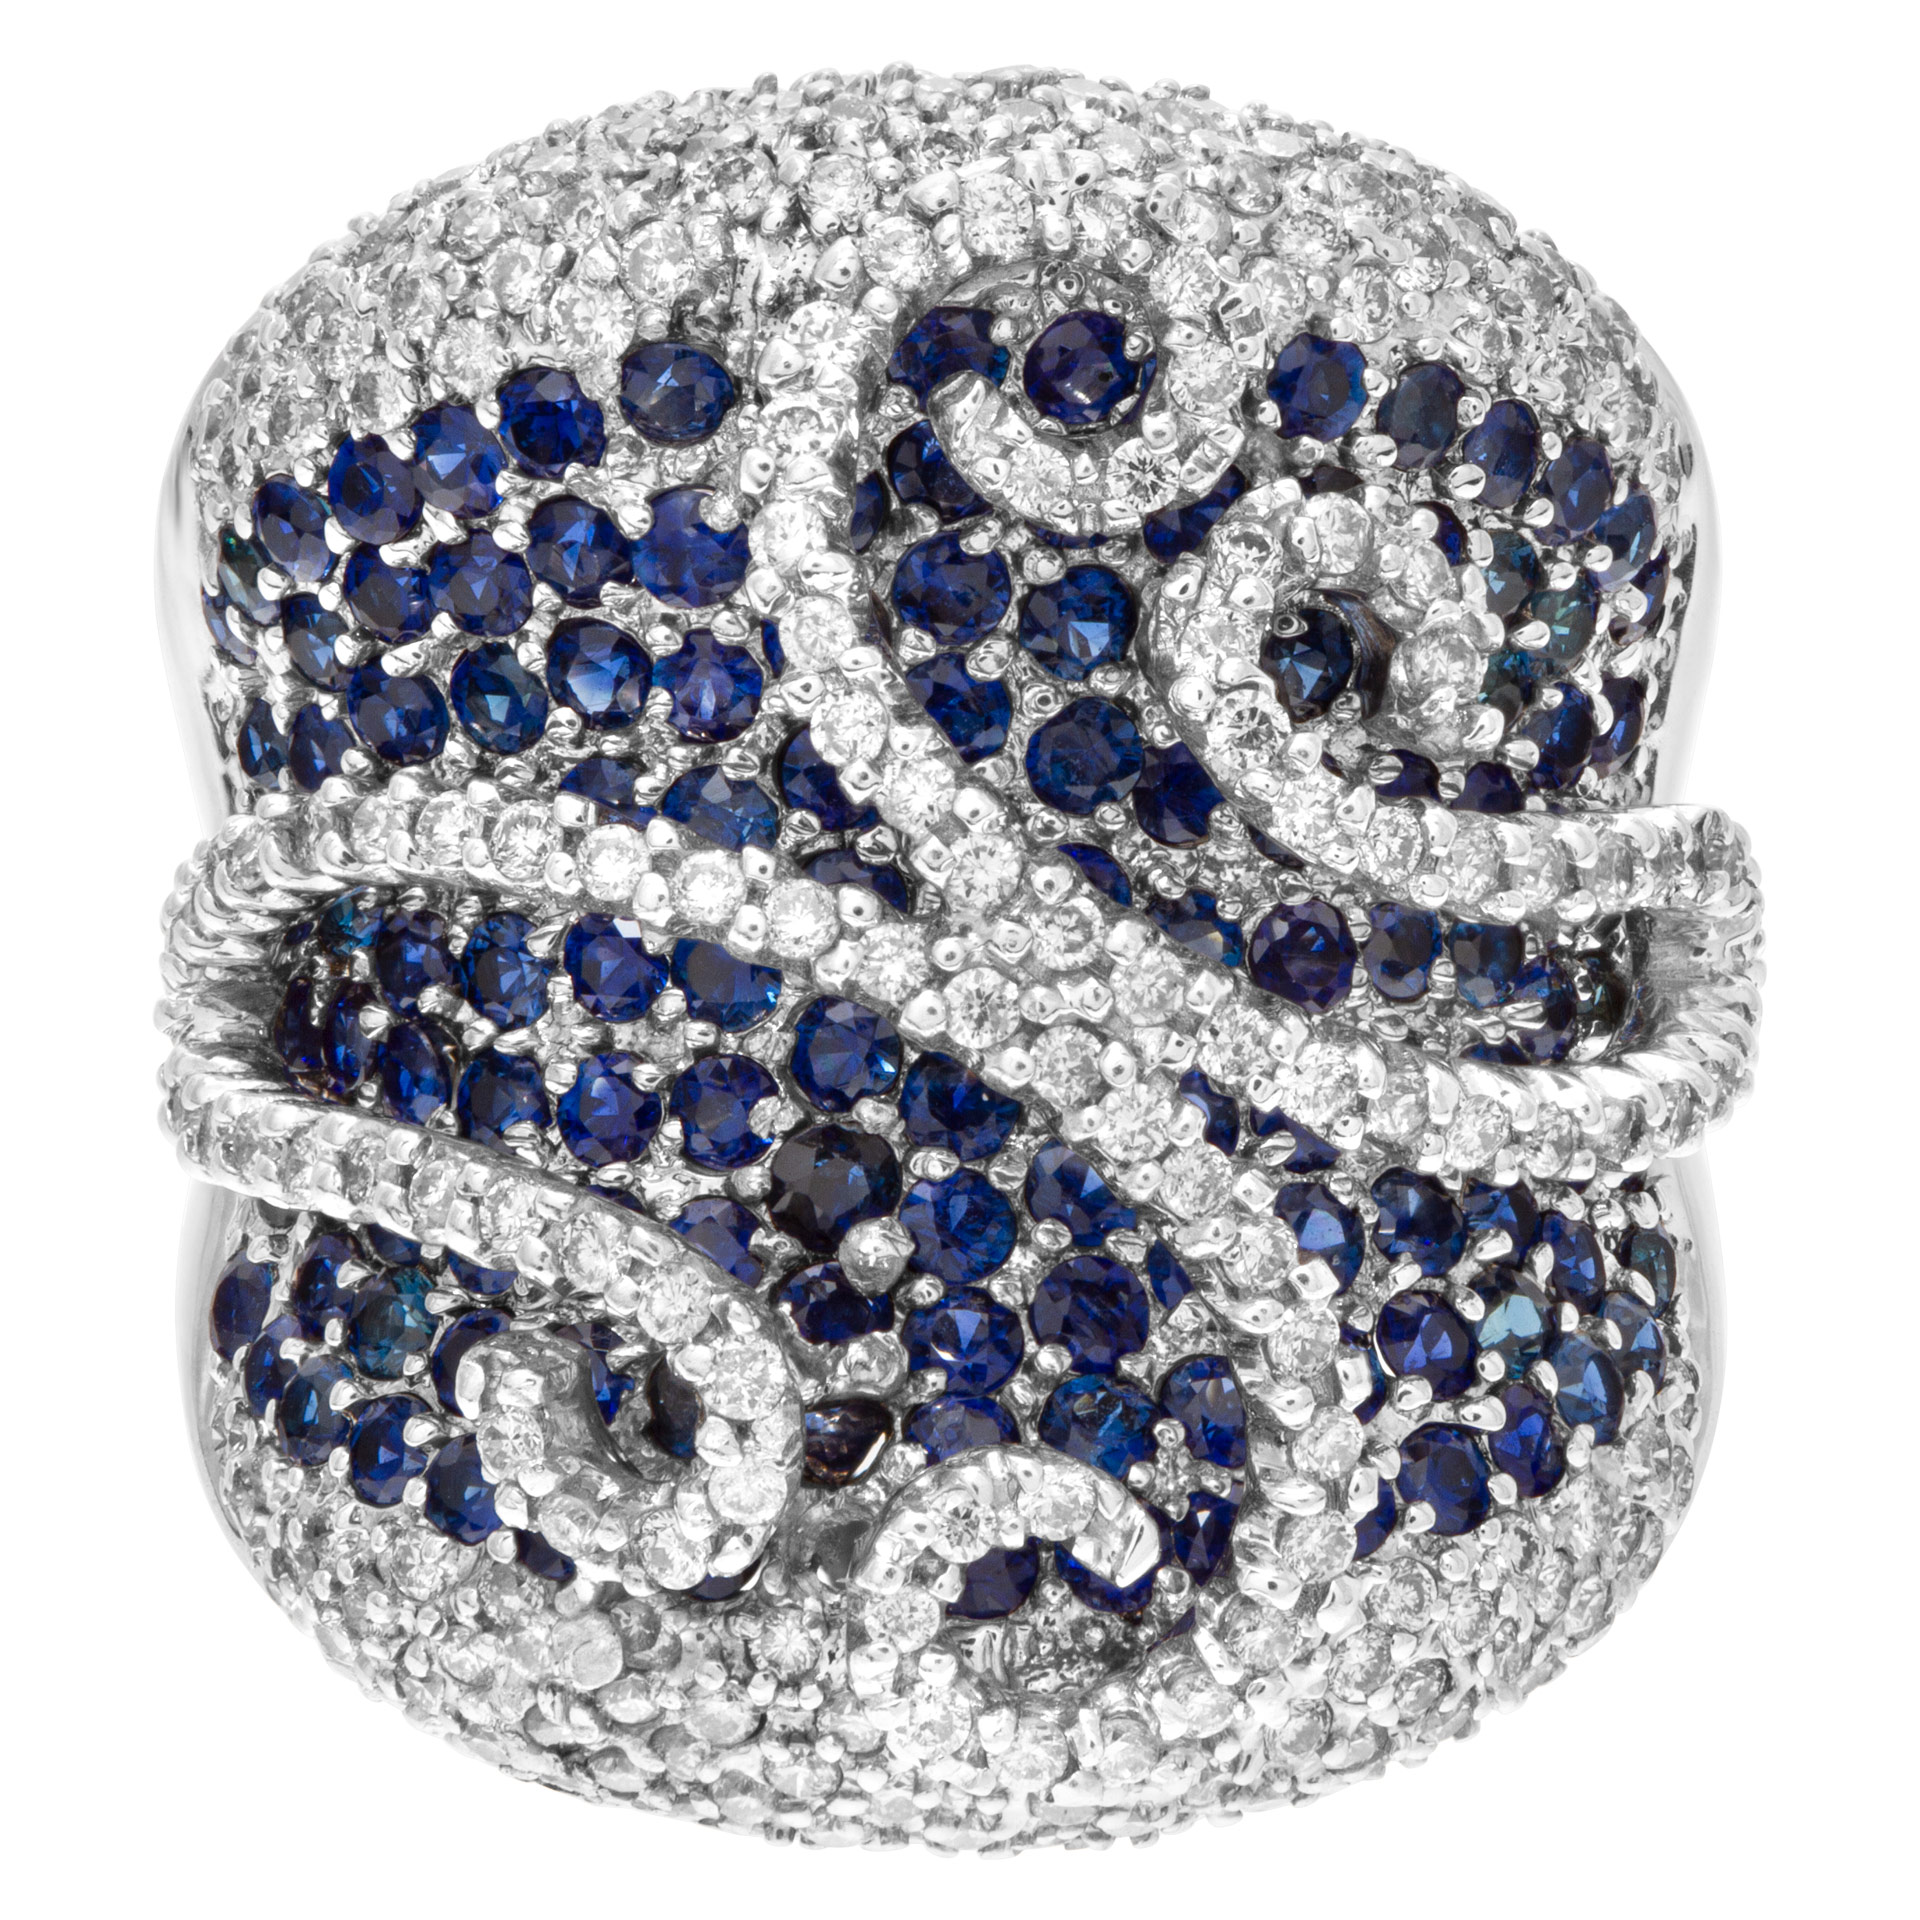 Wide pave diamonds & pave sapphire ring set in 18K white gold.